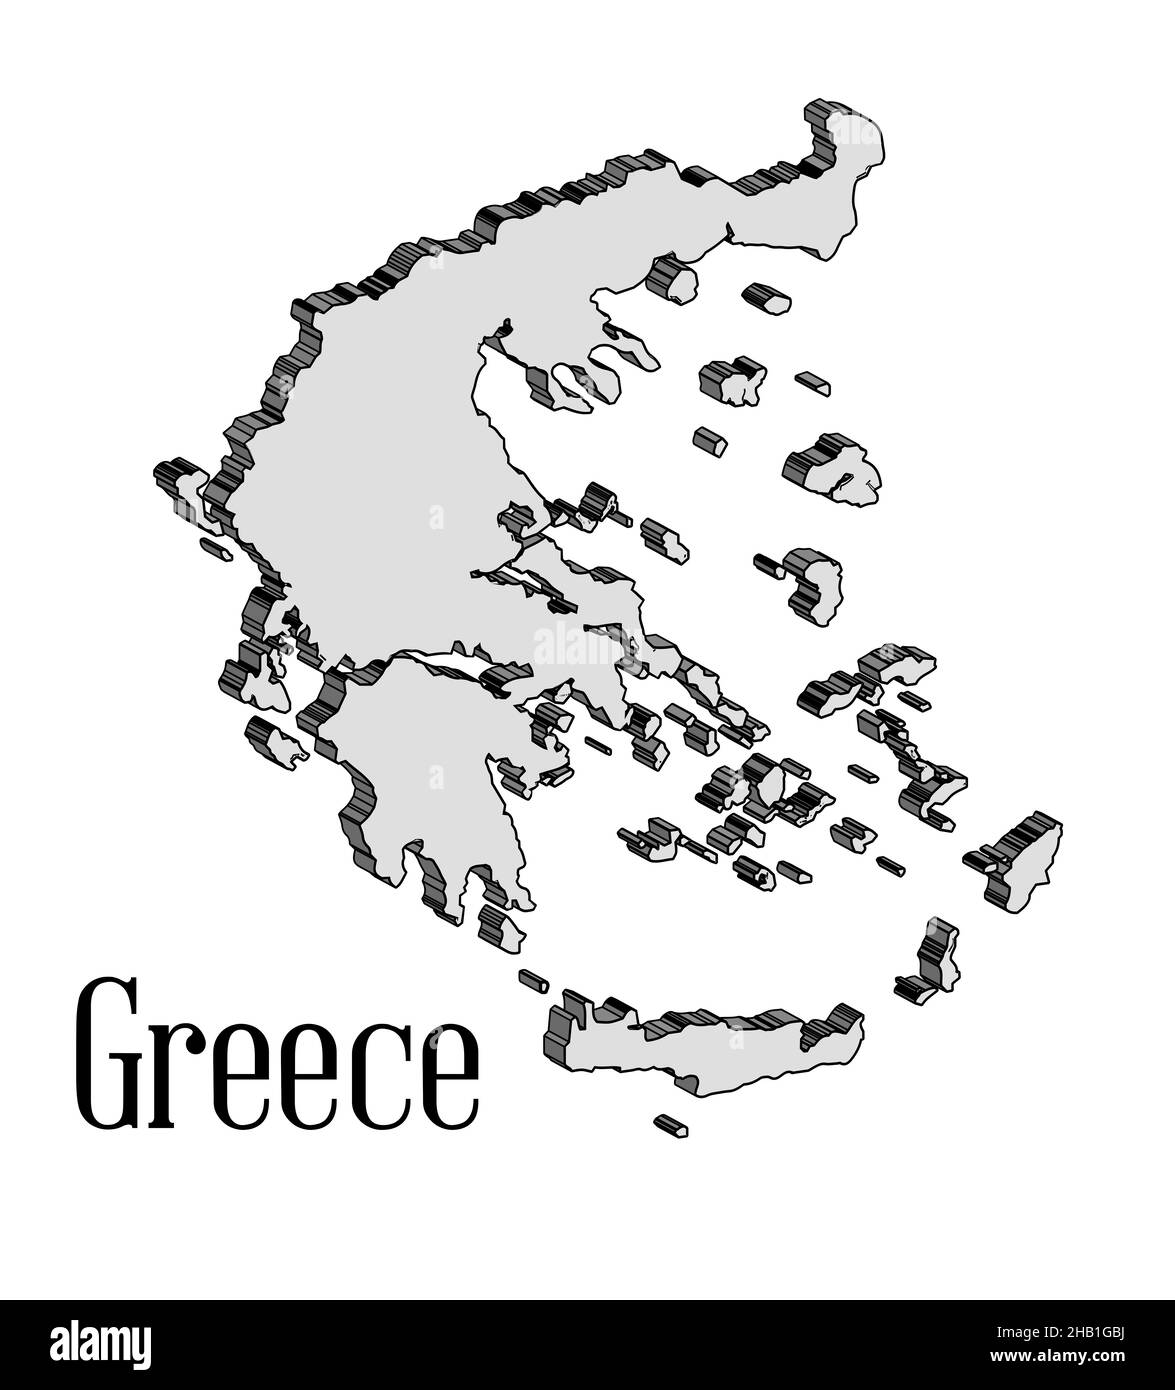 Outline map of Greece and the islands in 3D over a white background Stock Photo